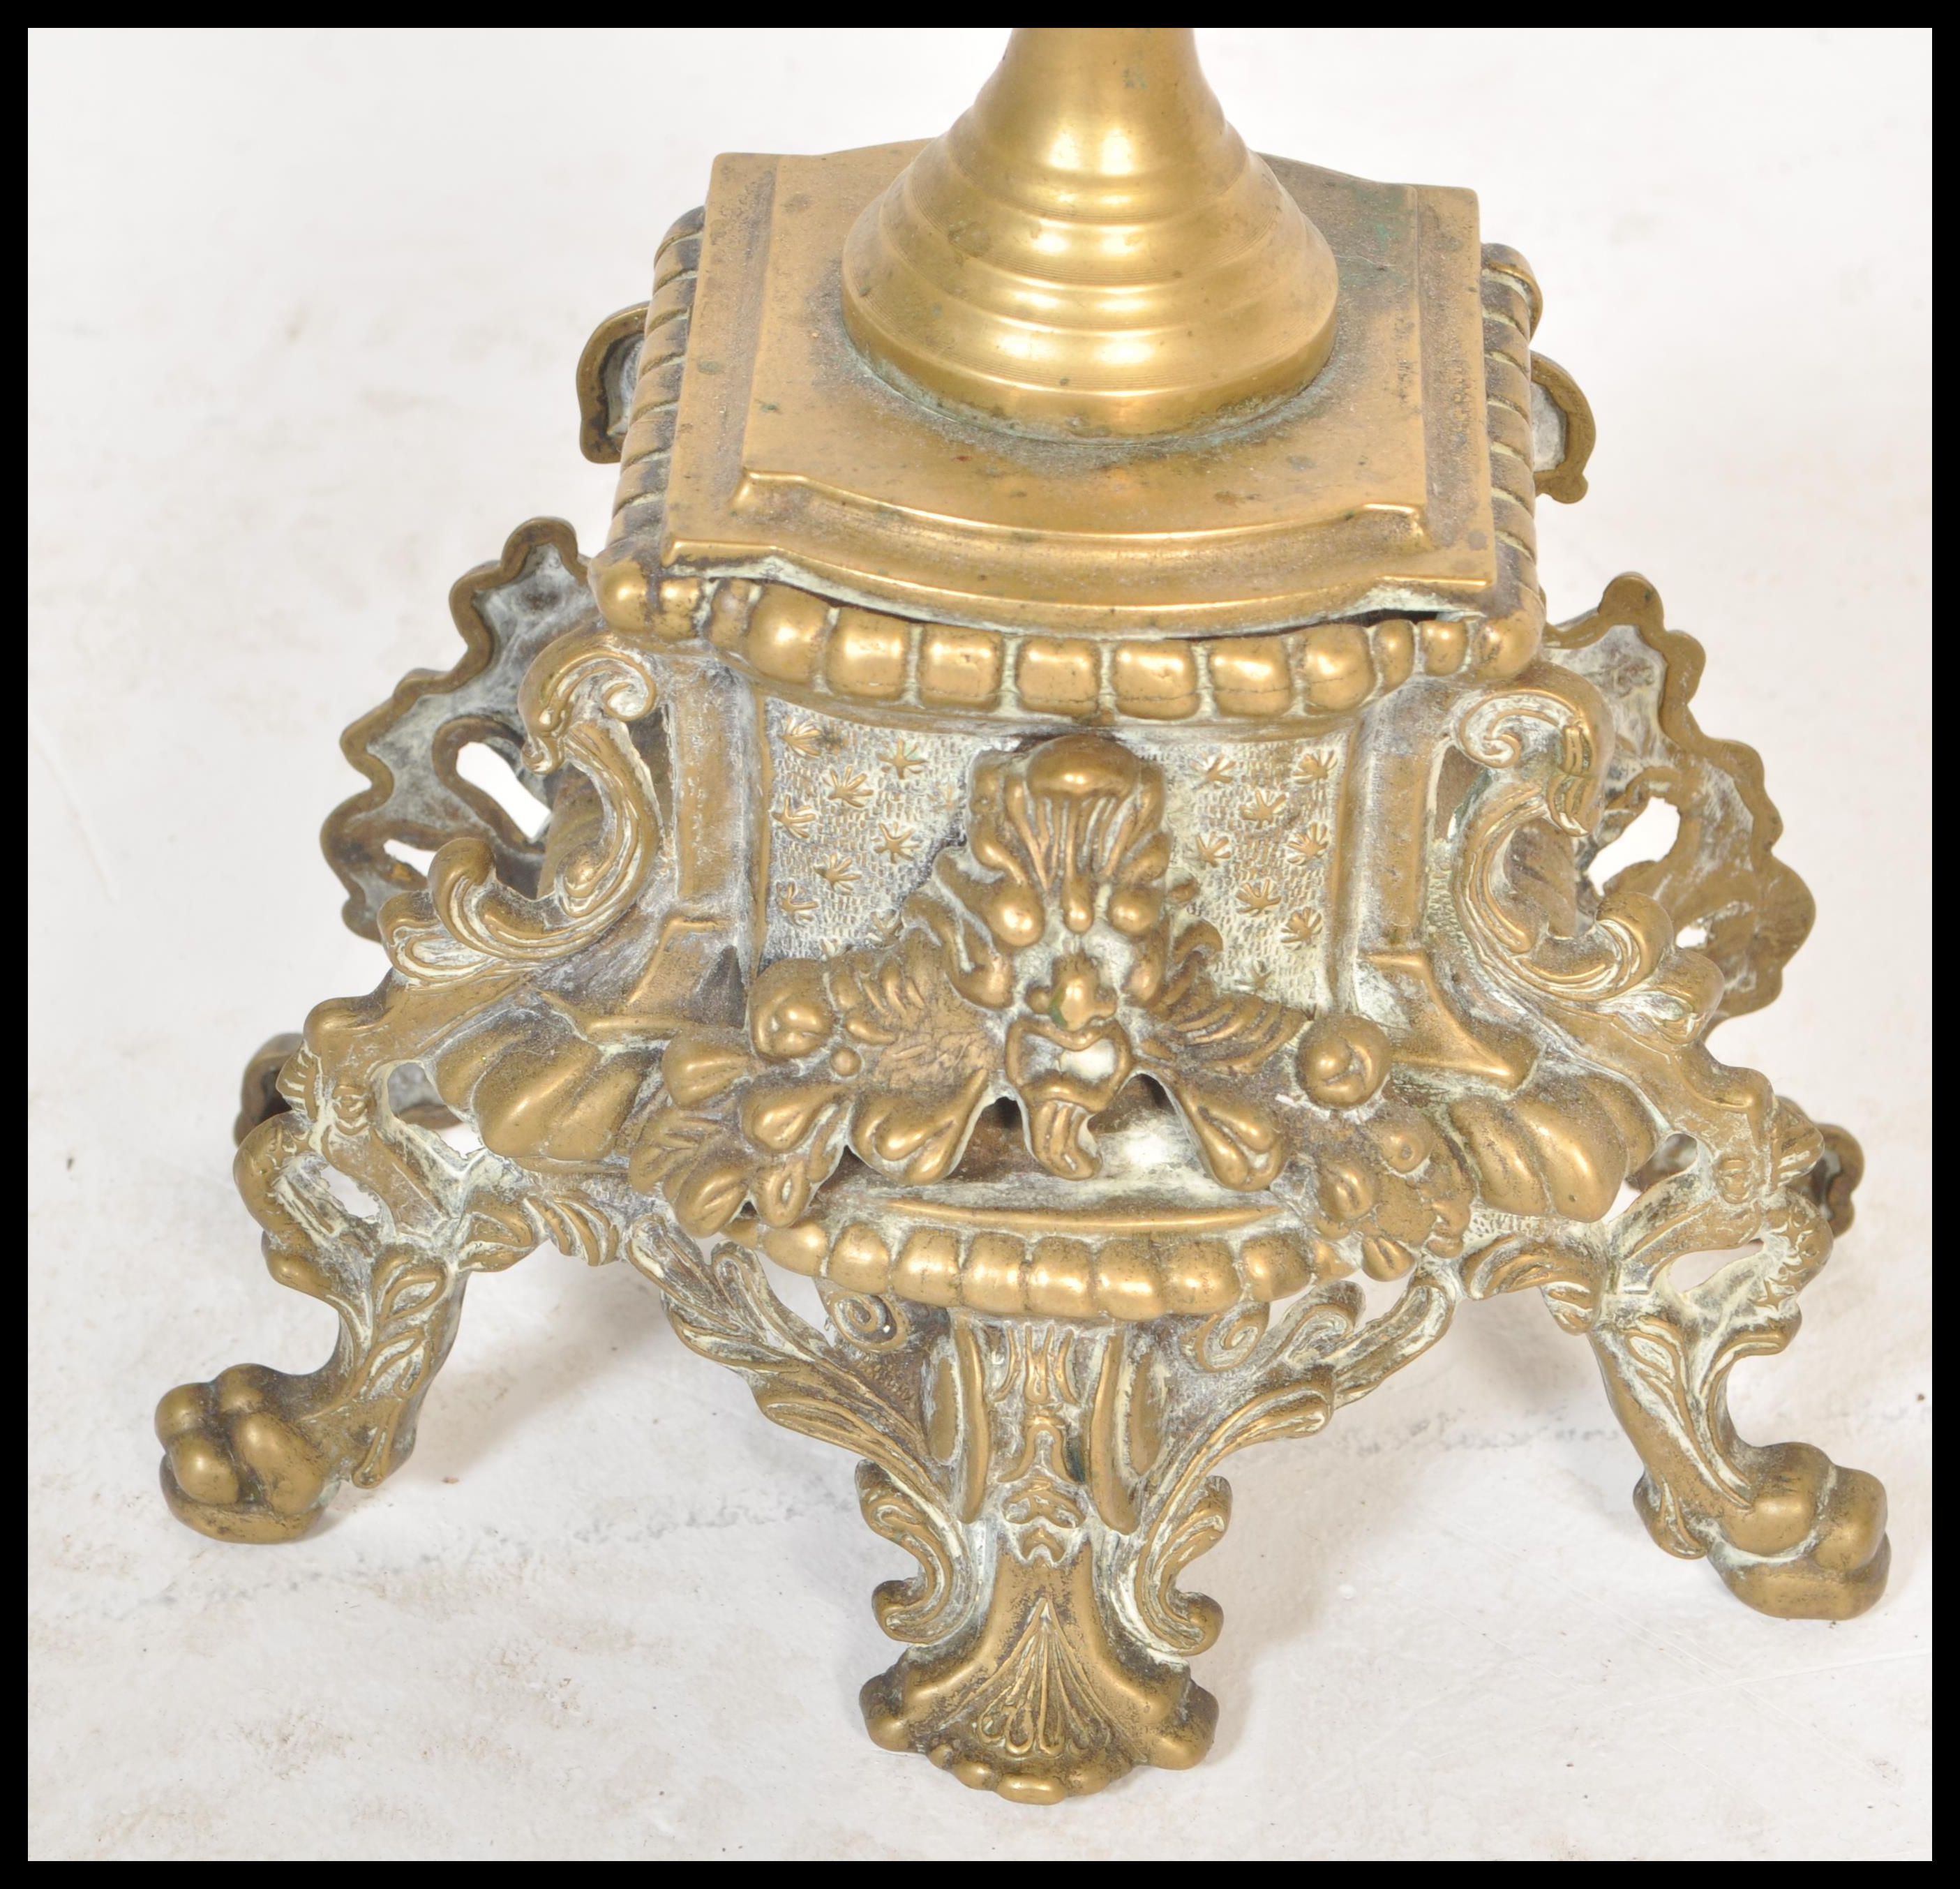 A 19th century, French large rococo revival brass gilt table five point candelabra centrepiece, - Image 2 of 6